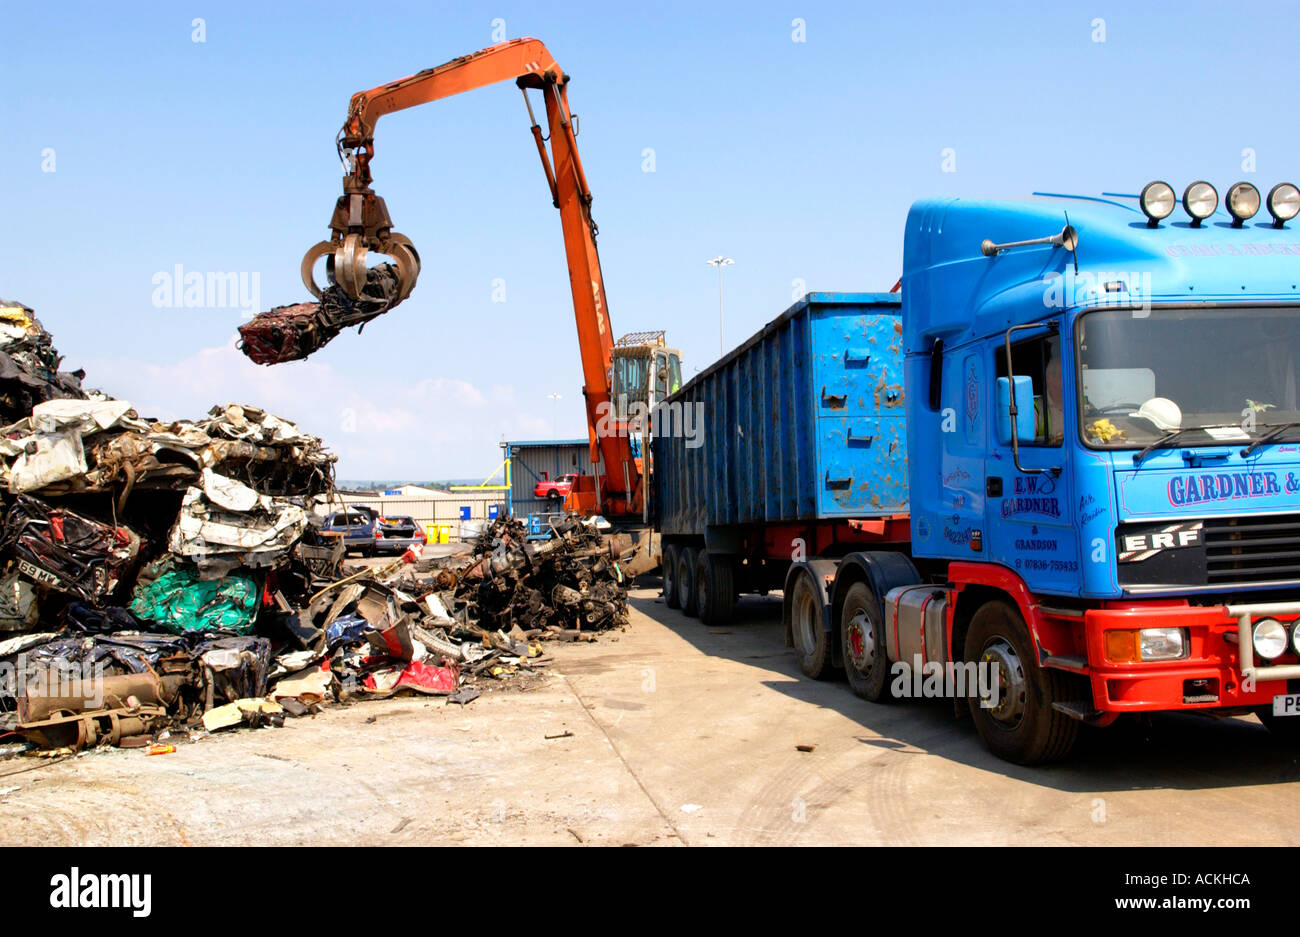 Compacted cars ready for recycling in scrapyard at Newport Docks South Wales GB UK Stock Photo